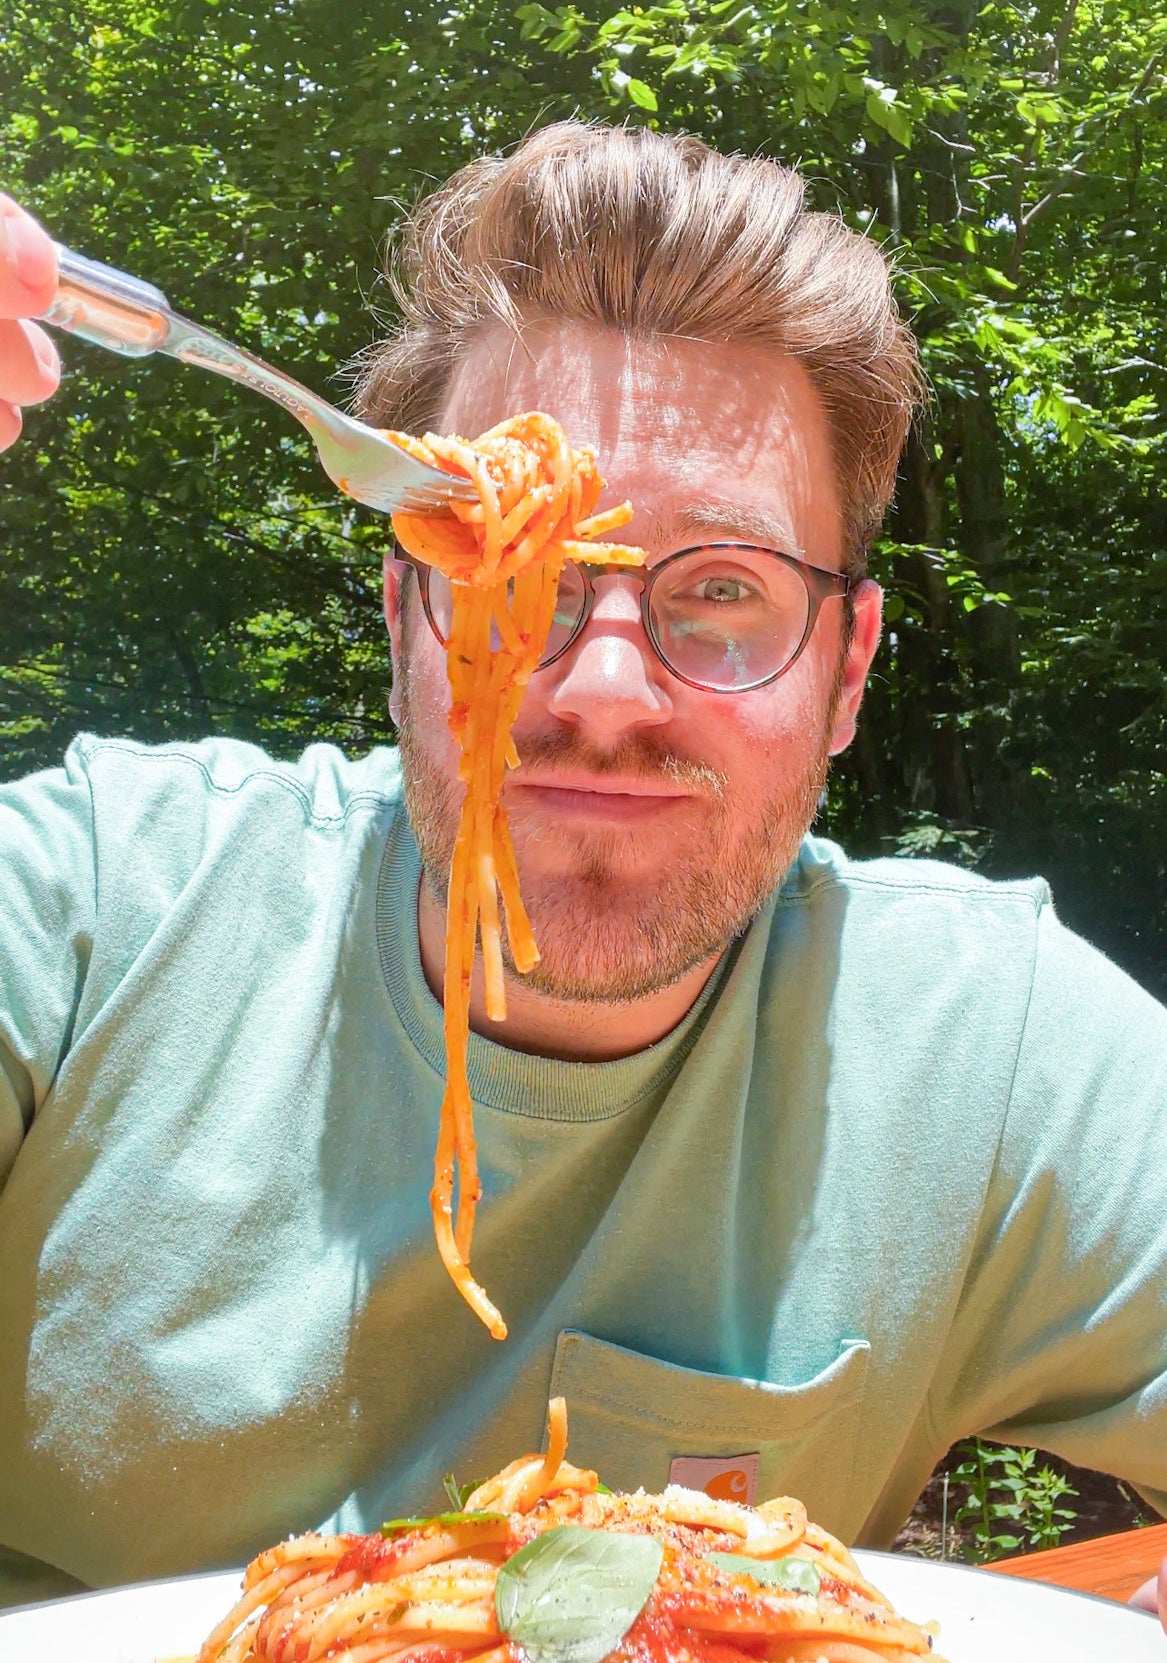 the author with a forkful of spaghetti